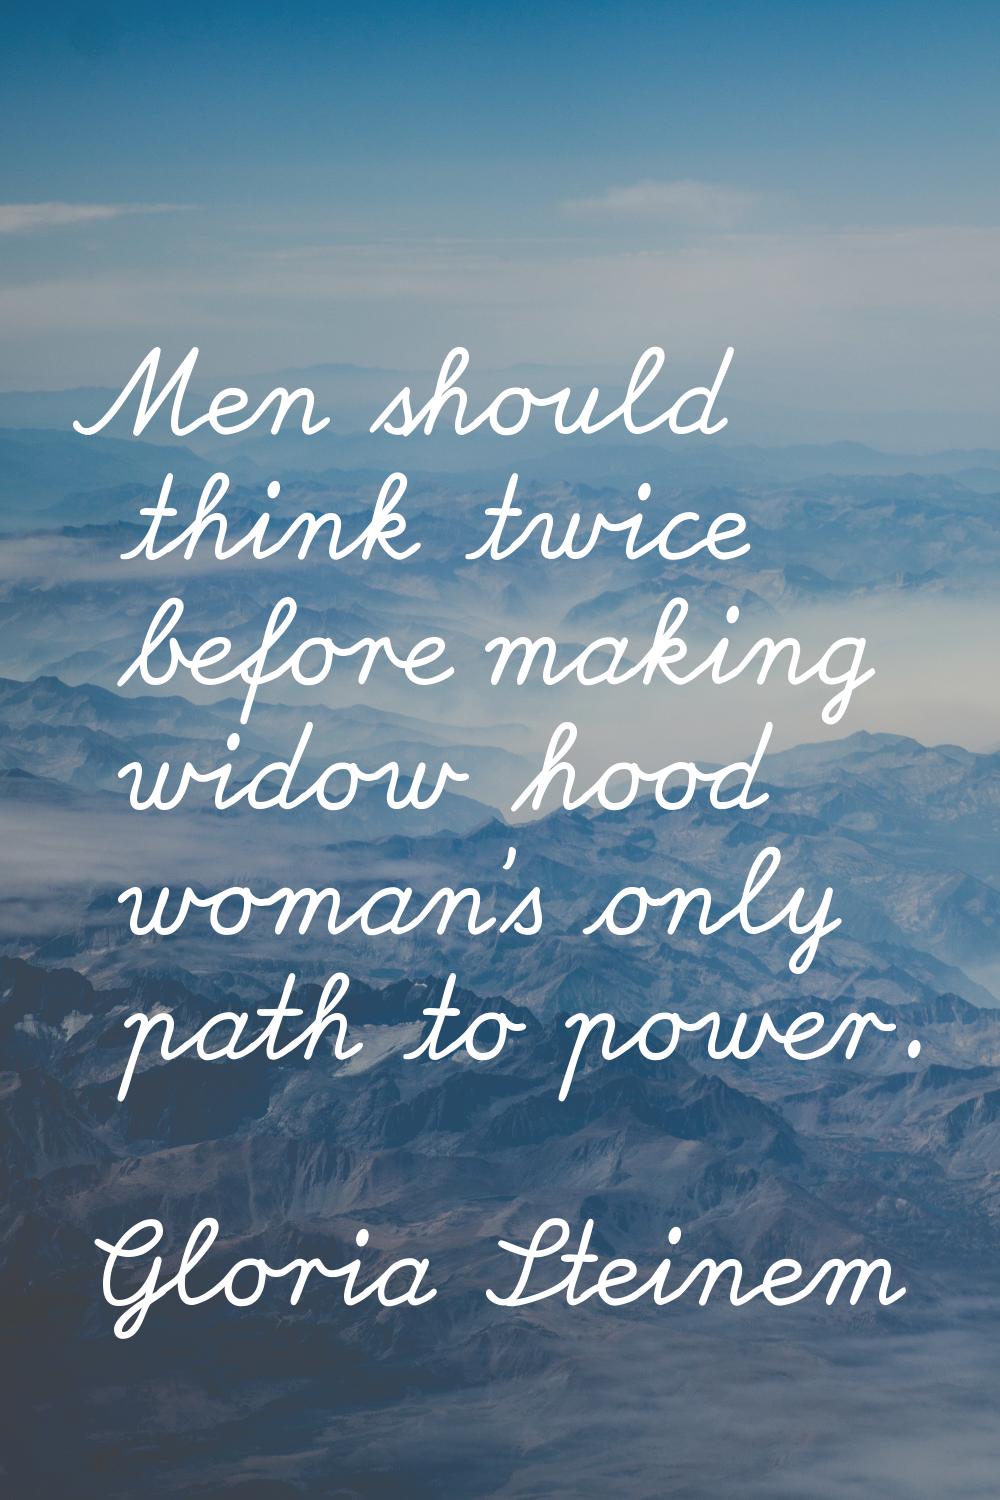 Men should think twice before making widow hood woman's only path to power.